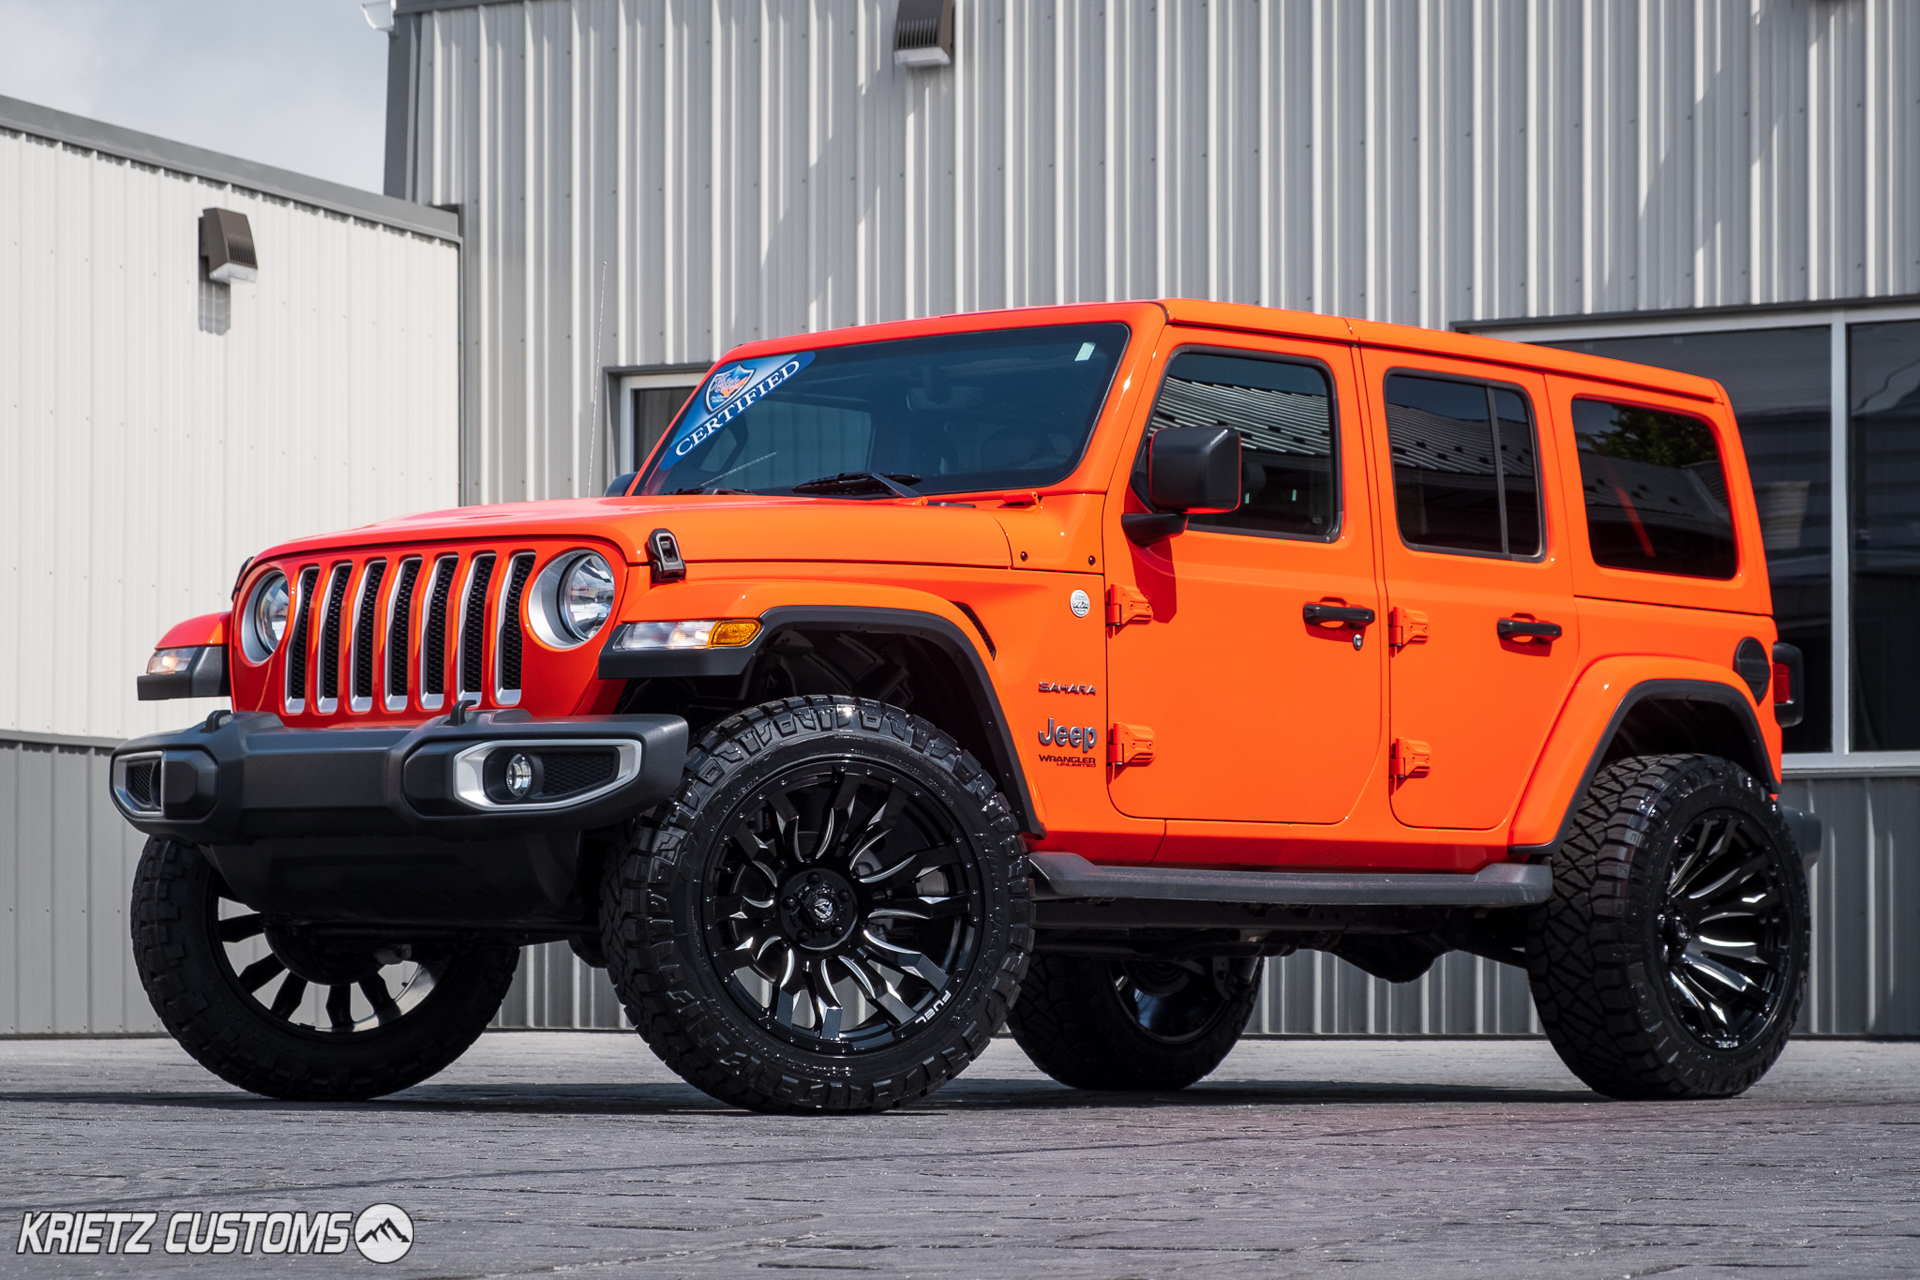 Lifted 2019 Jeep Wrangler with 22×12 Fuel Blitz Wheels and